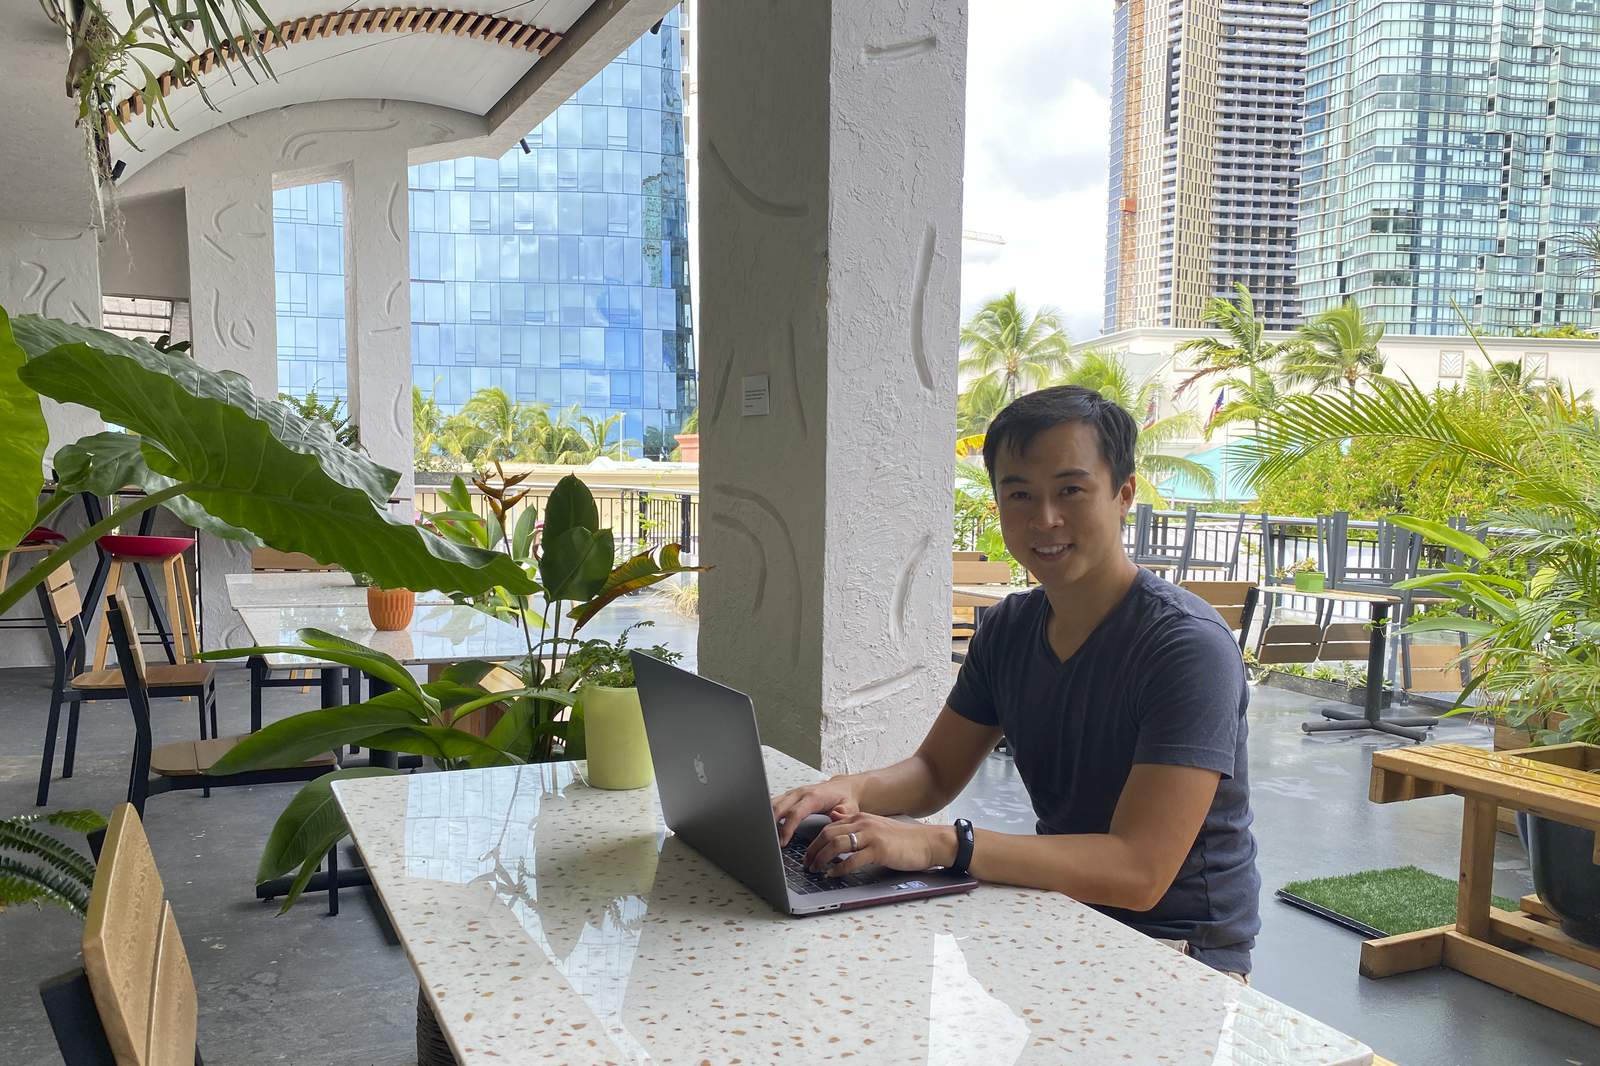 Hawaii seeks to be seen as a remote workplace with a view